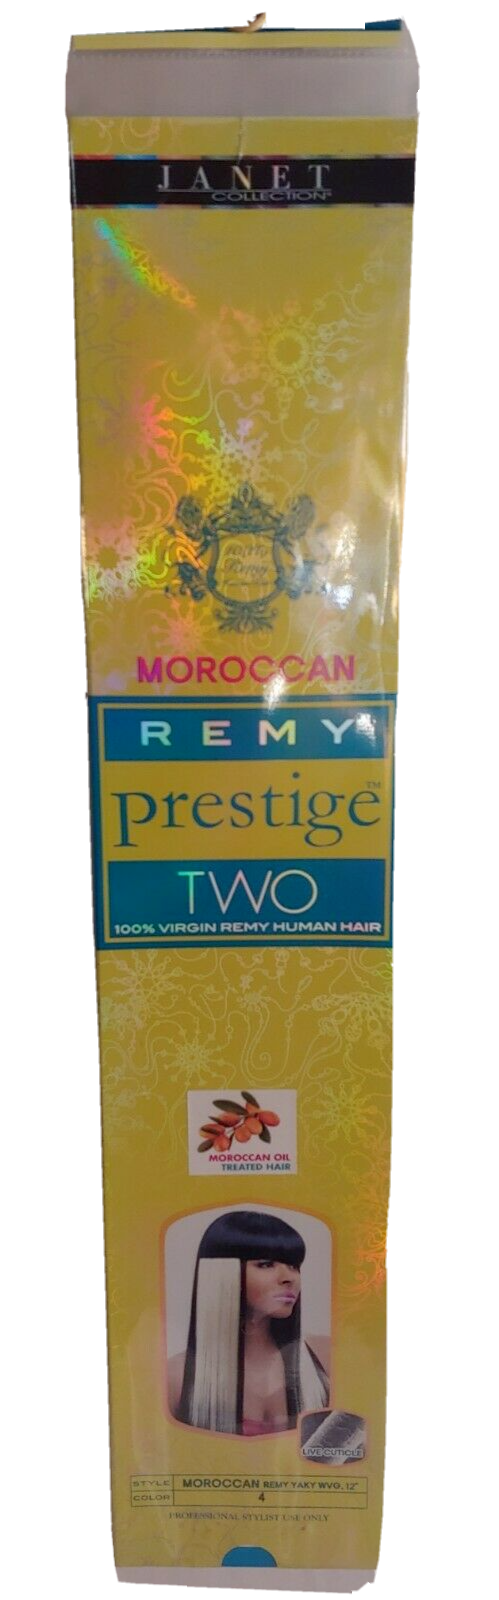 Remy Hair Weave Janet Collection Prestige Two Moroccan Remy Yaky WVG 12" new - $46.44